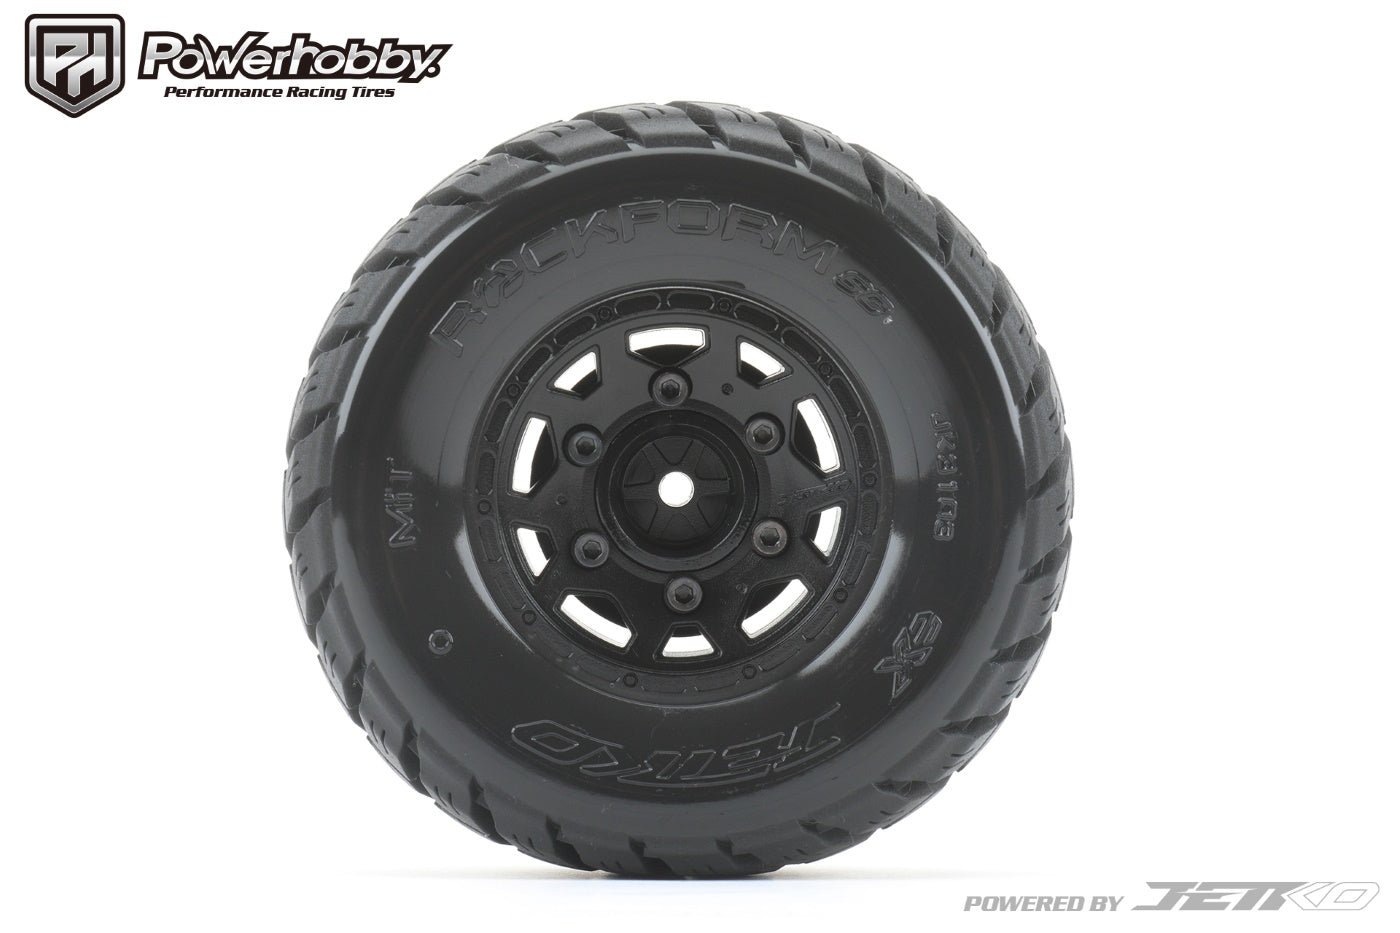 Powerhobby Rockform 1/10 SC Belted Tires (2) with Removable Hex Wheels